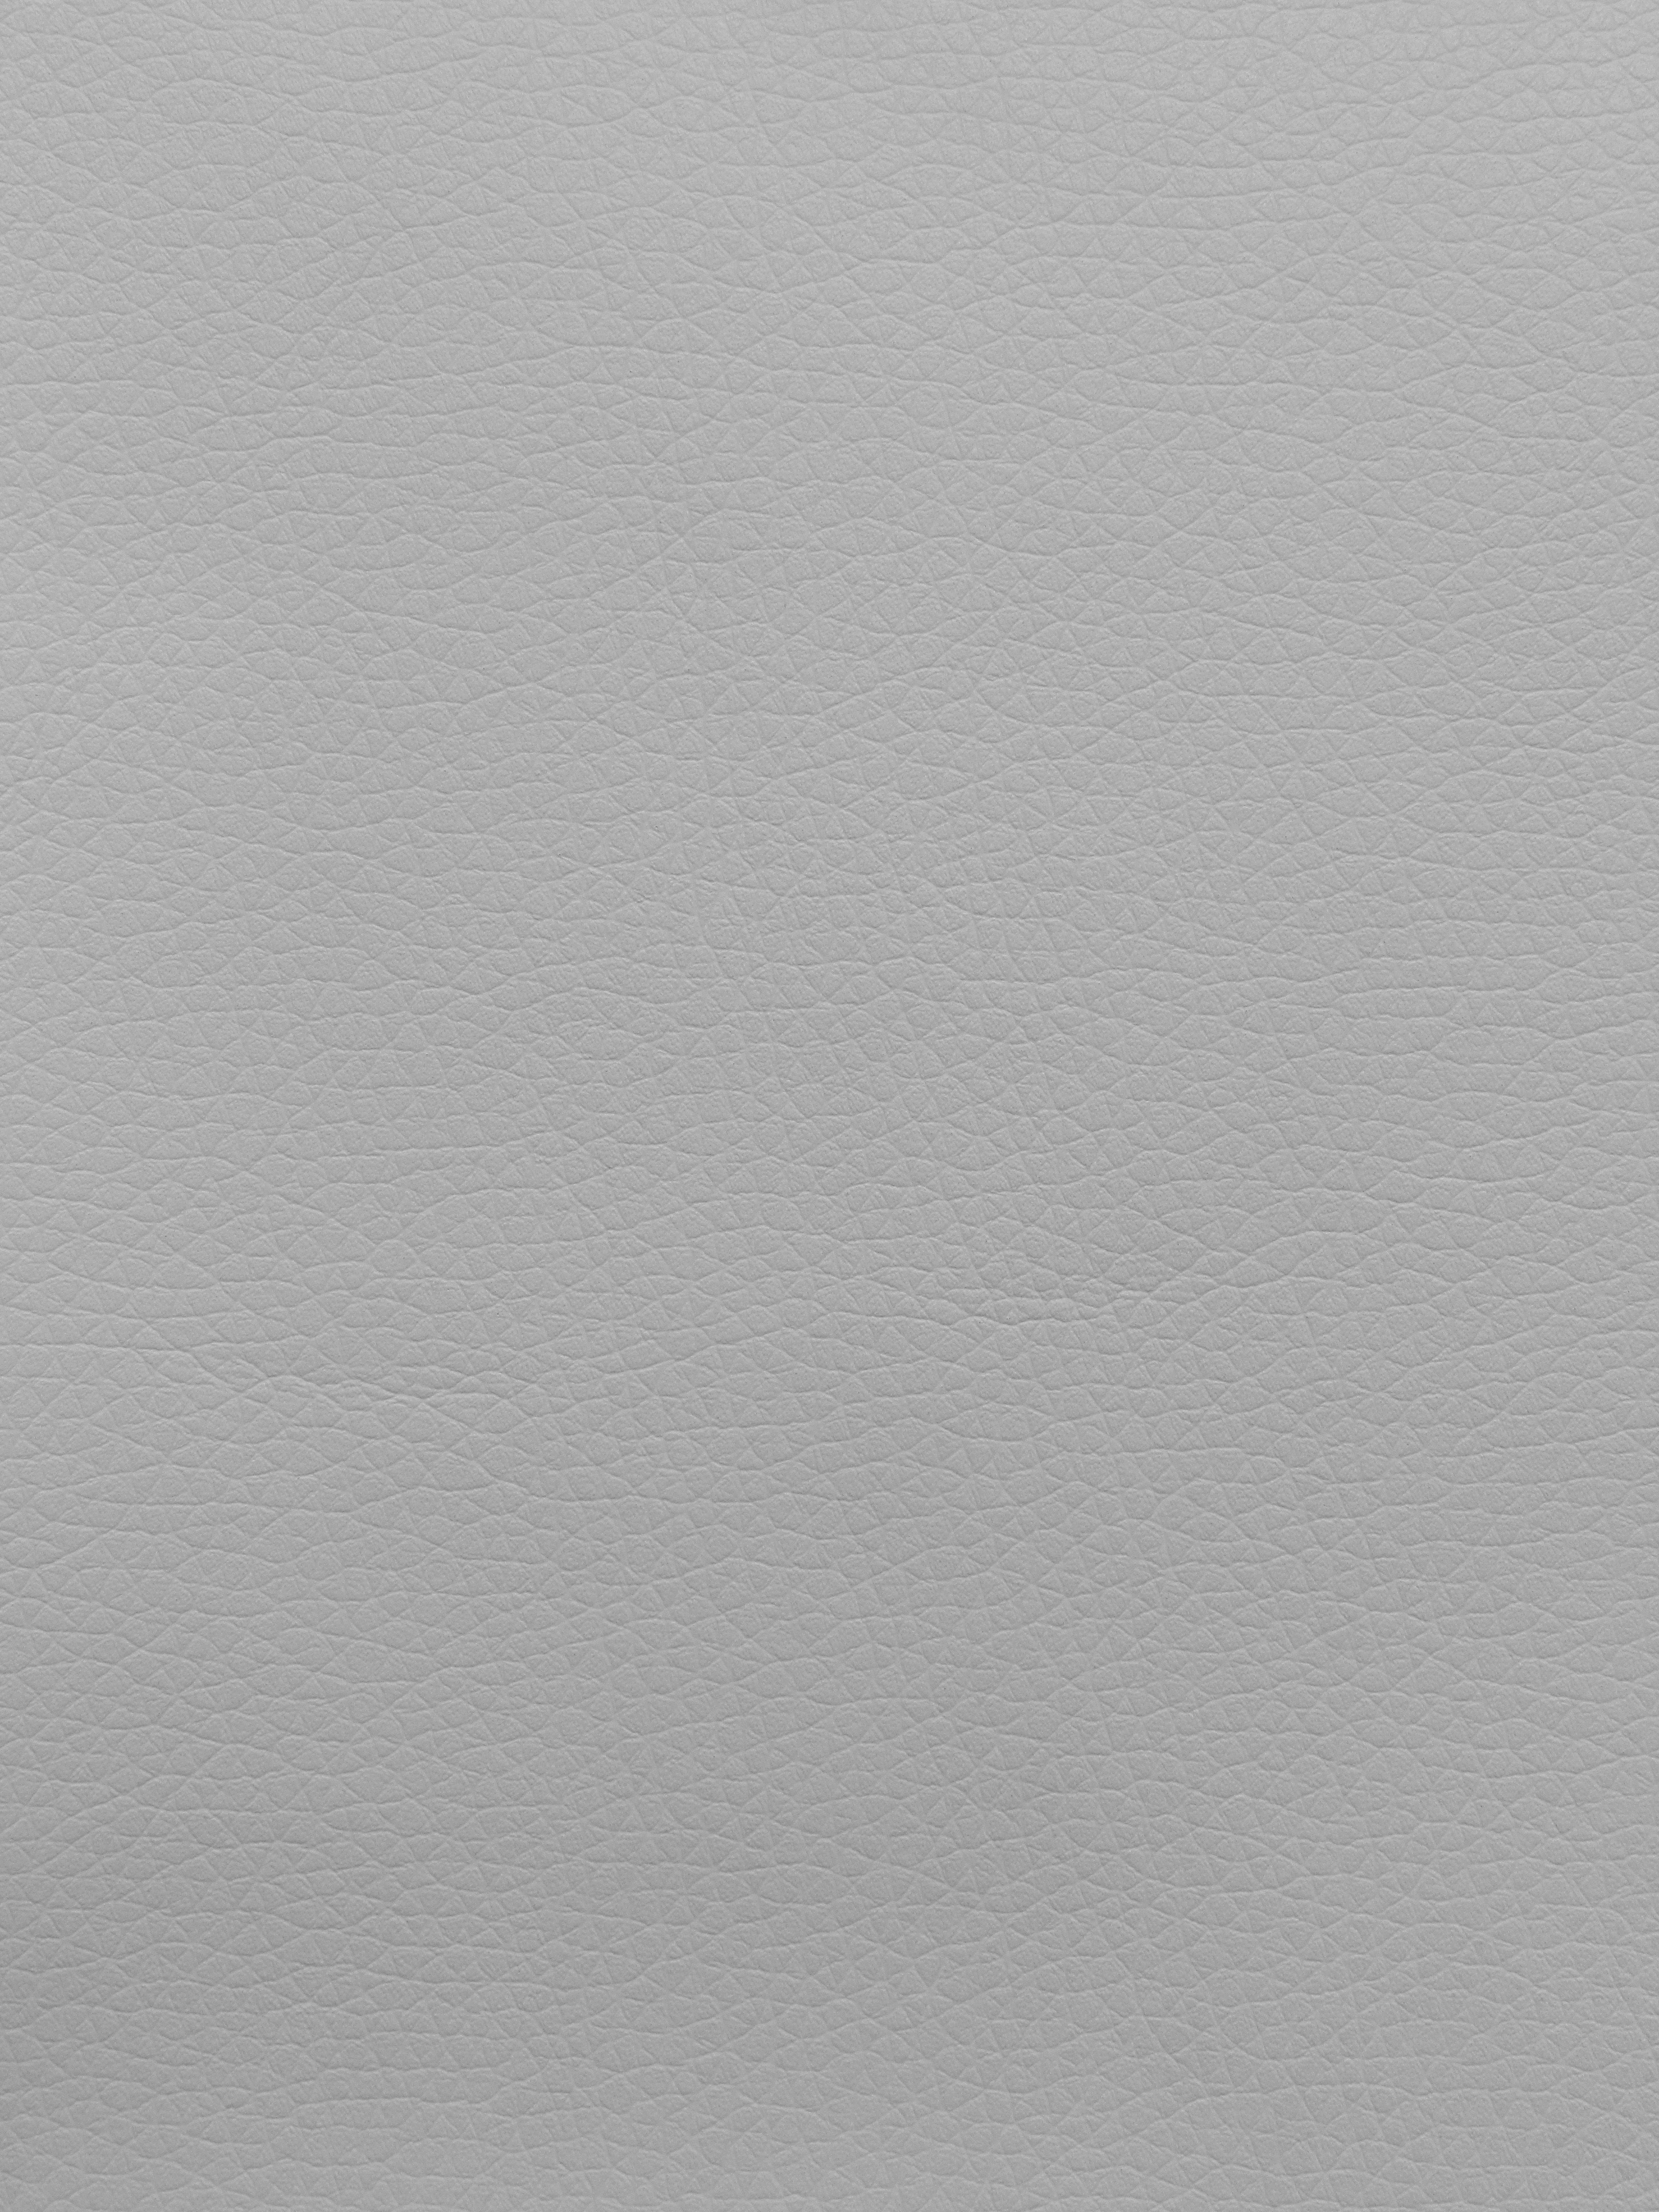 White Leather Texture Light Embossed Fabric Free Stock Photo Wallpaper